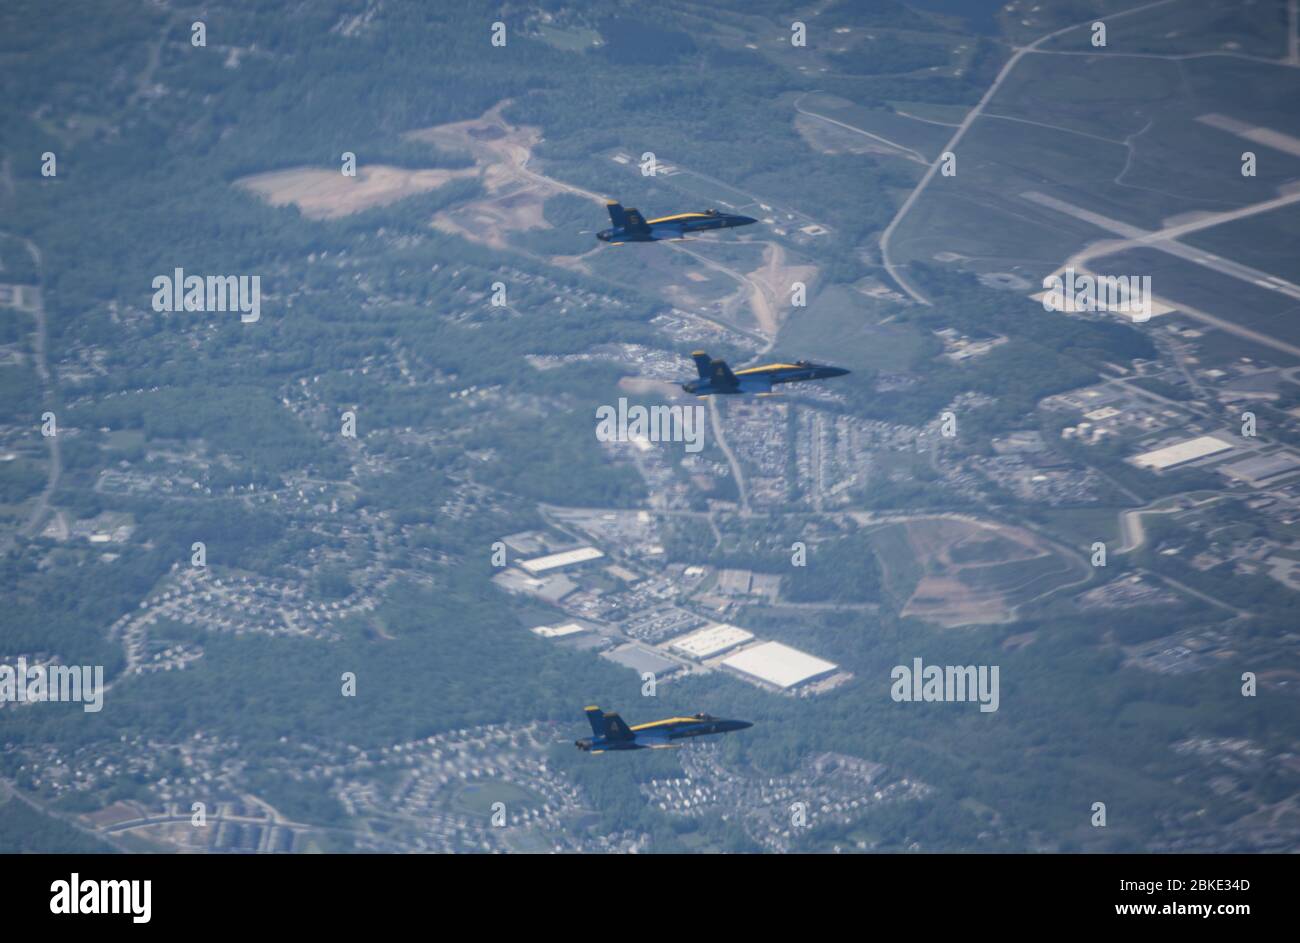 The U.S. Navy Blue Angels conduct a flyover as part of the America Strong campaign in Washington DC, May 2, 2020. The demonstration team conducted flyovers alongside the U.S. Air Force Thunderbirds to honor healthcare workers, first responders, and other essential personnel who are working on the front lines to combat COVID-19. (U.S. Air Force photo by Senior Airman Ariel Owings) Stock Photo